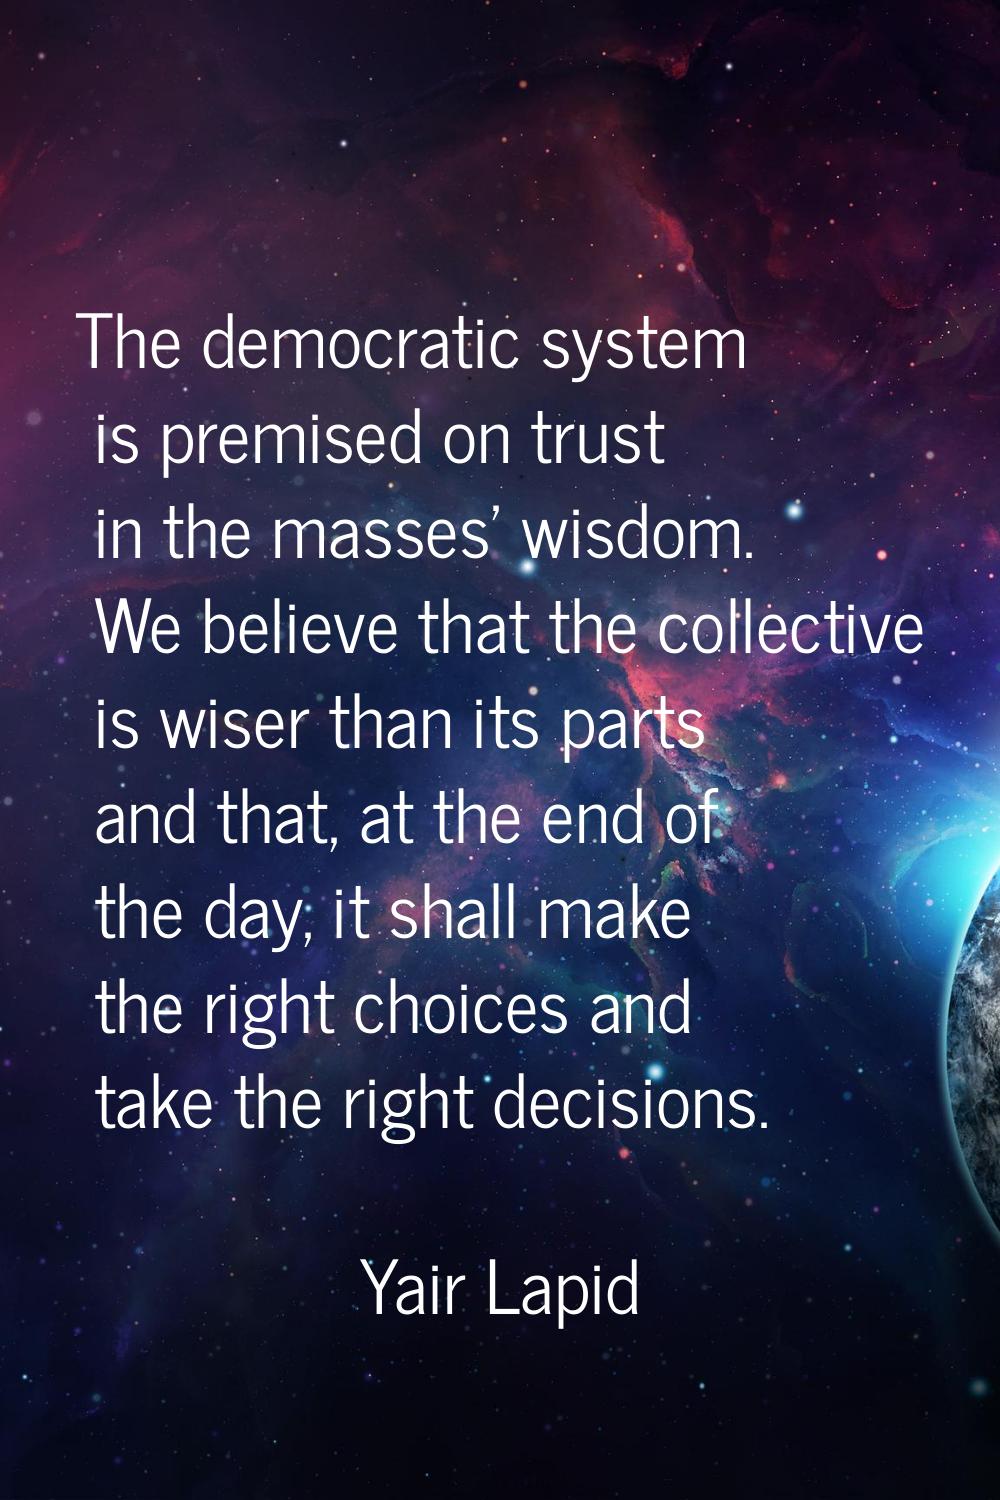 The democratic system is premised on trust in the masses' wisdom. We believe that the collective is